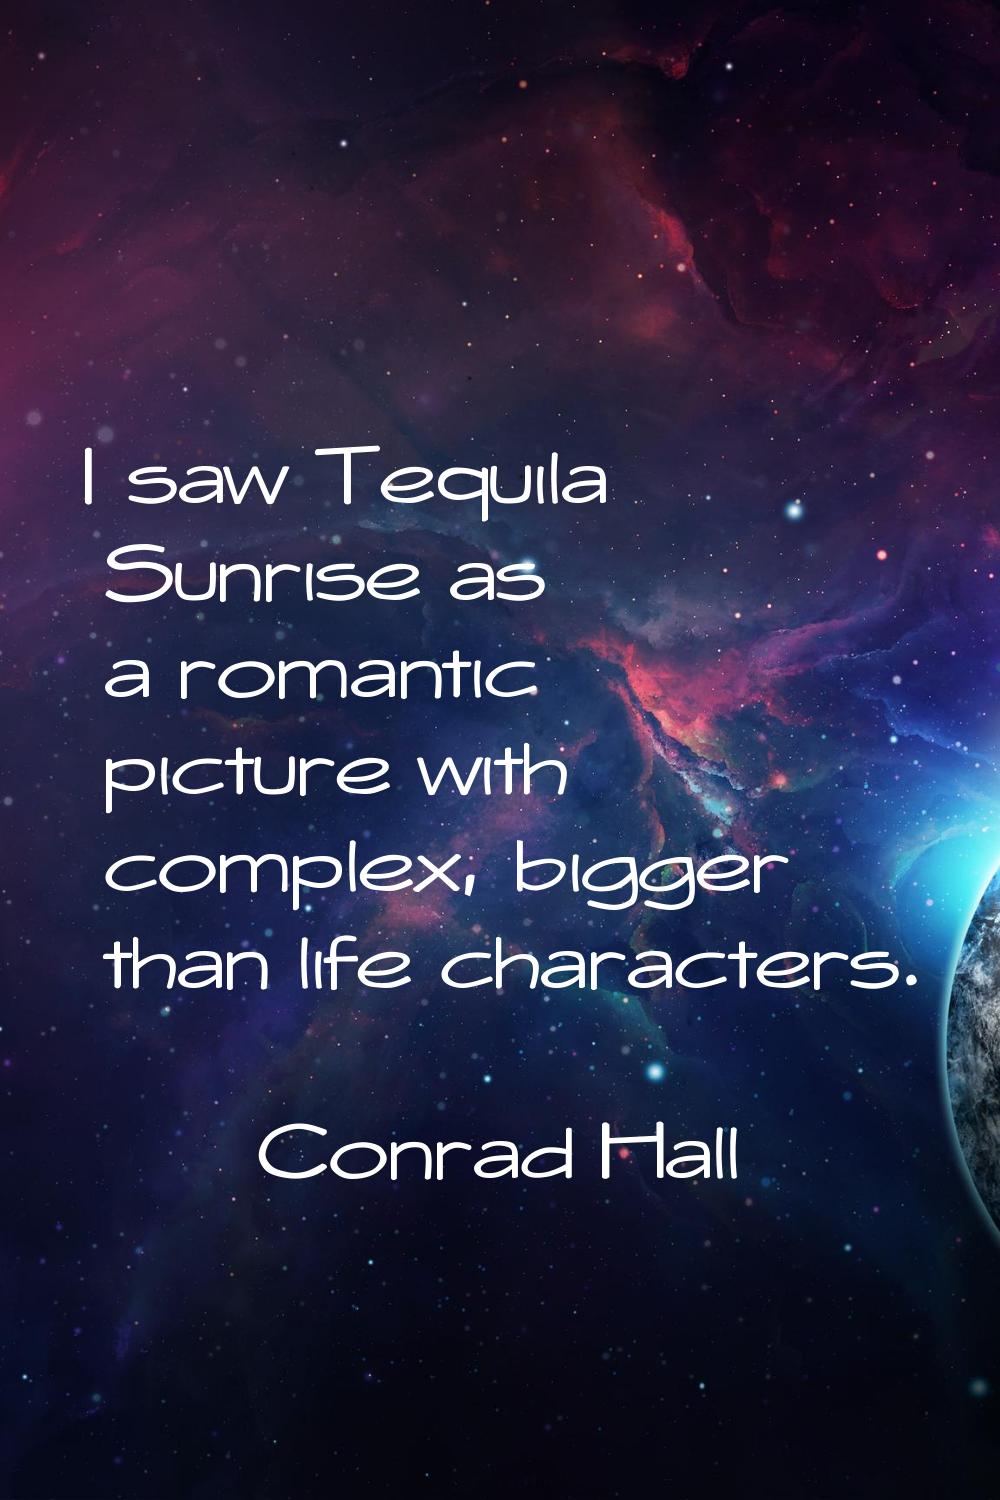 I saw Tequila Sunrise as a romantic picture with complex, bigger than life characters.